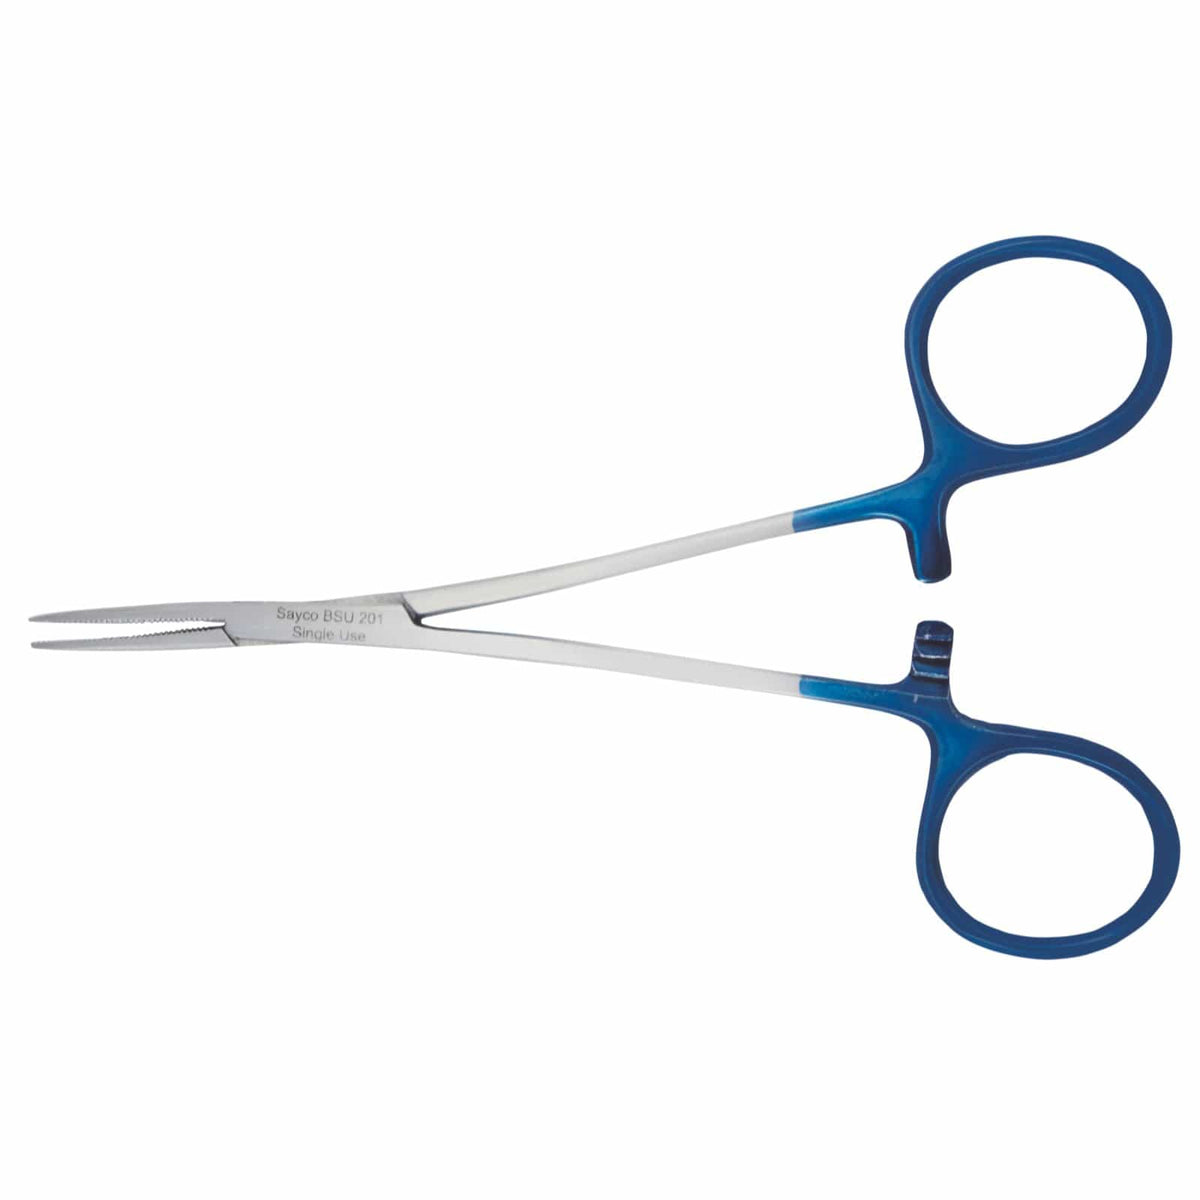 SAYCO Sterile Halsted Mosquito Forceps